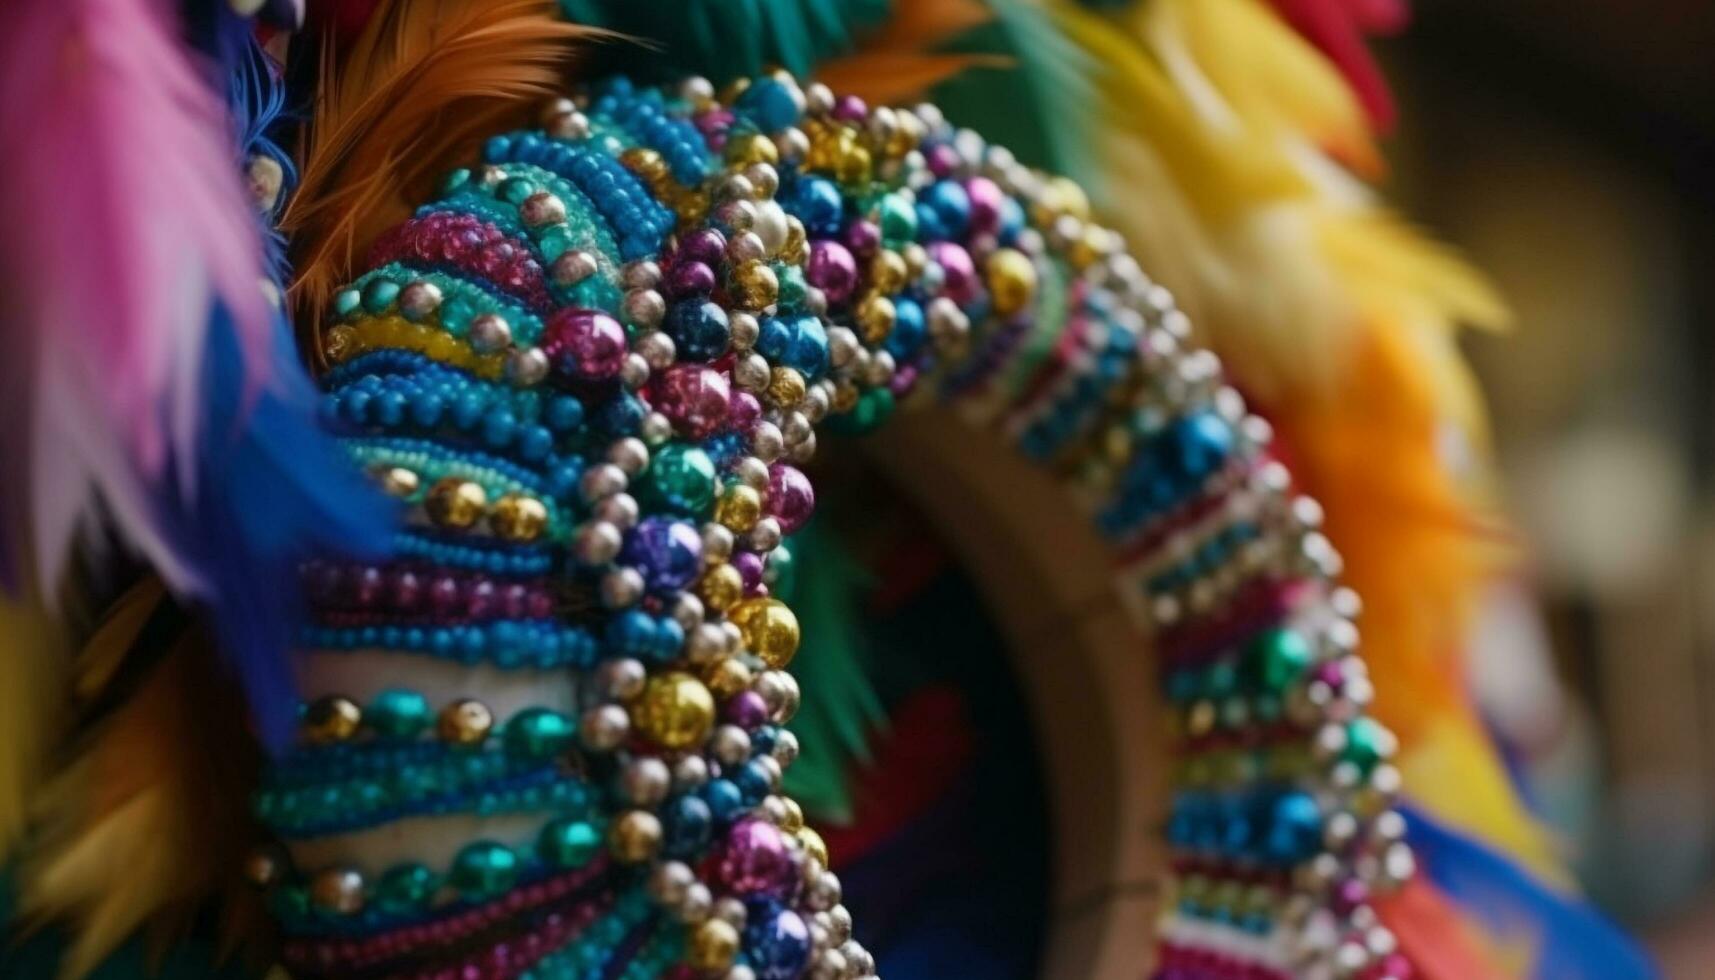 Vibrant colors adorn ornate indigenous culture jewelry generated by AI photo